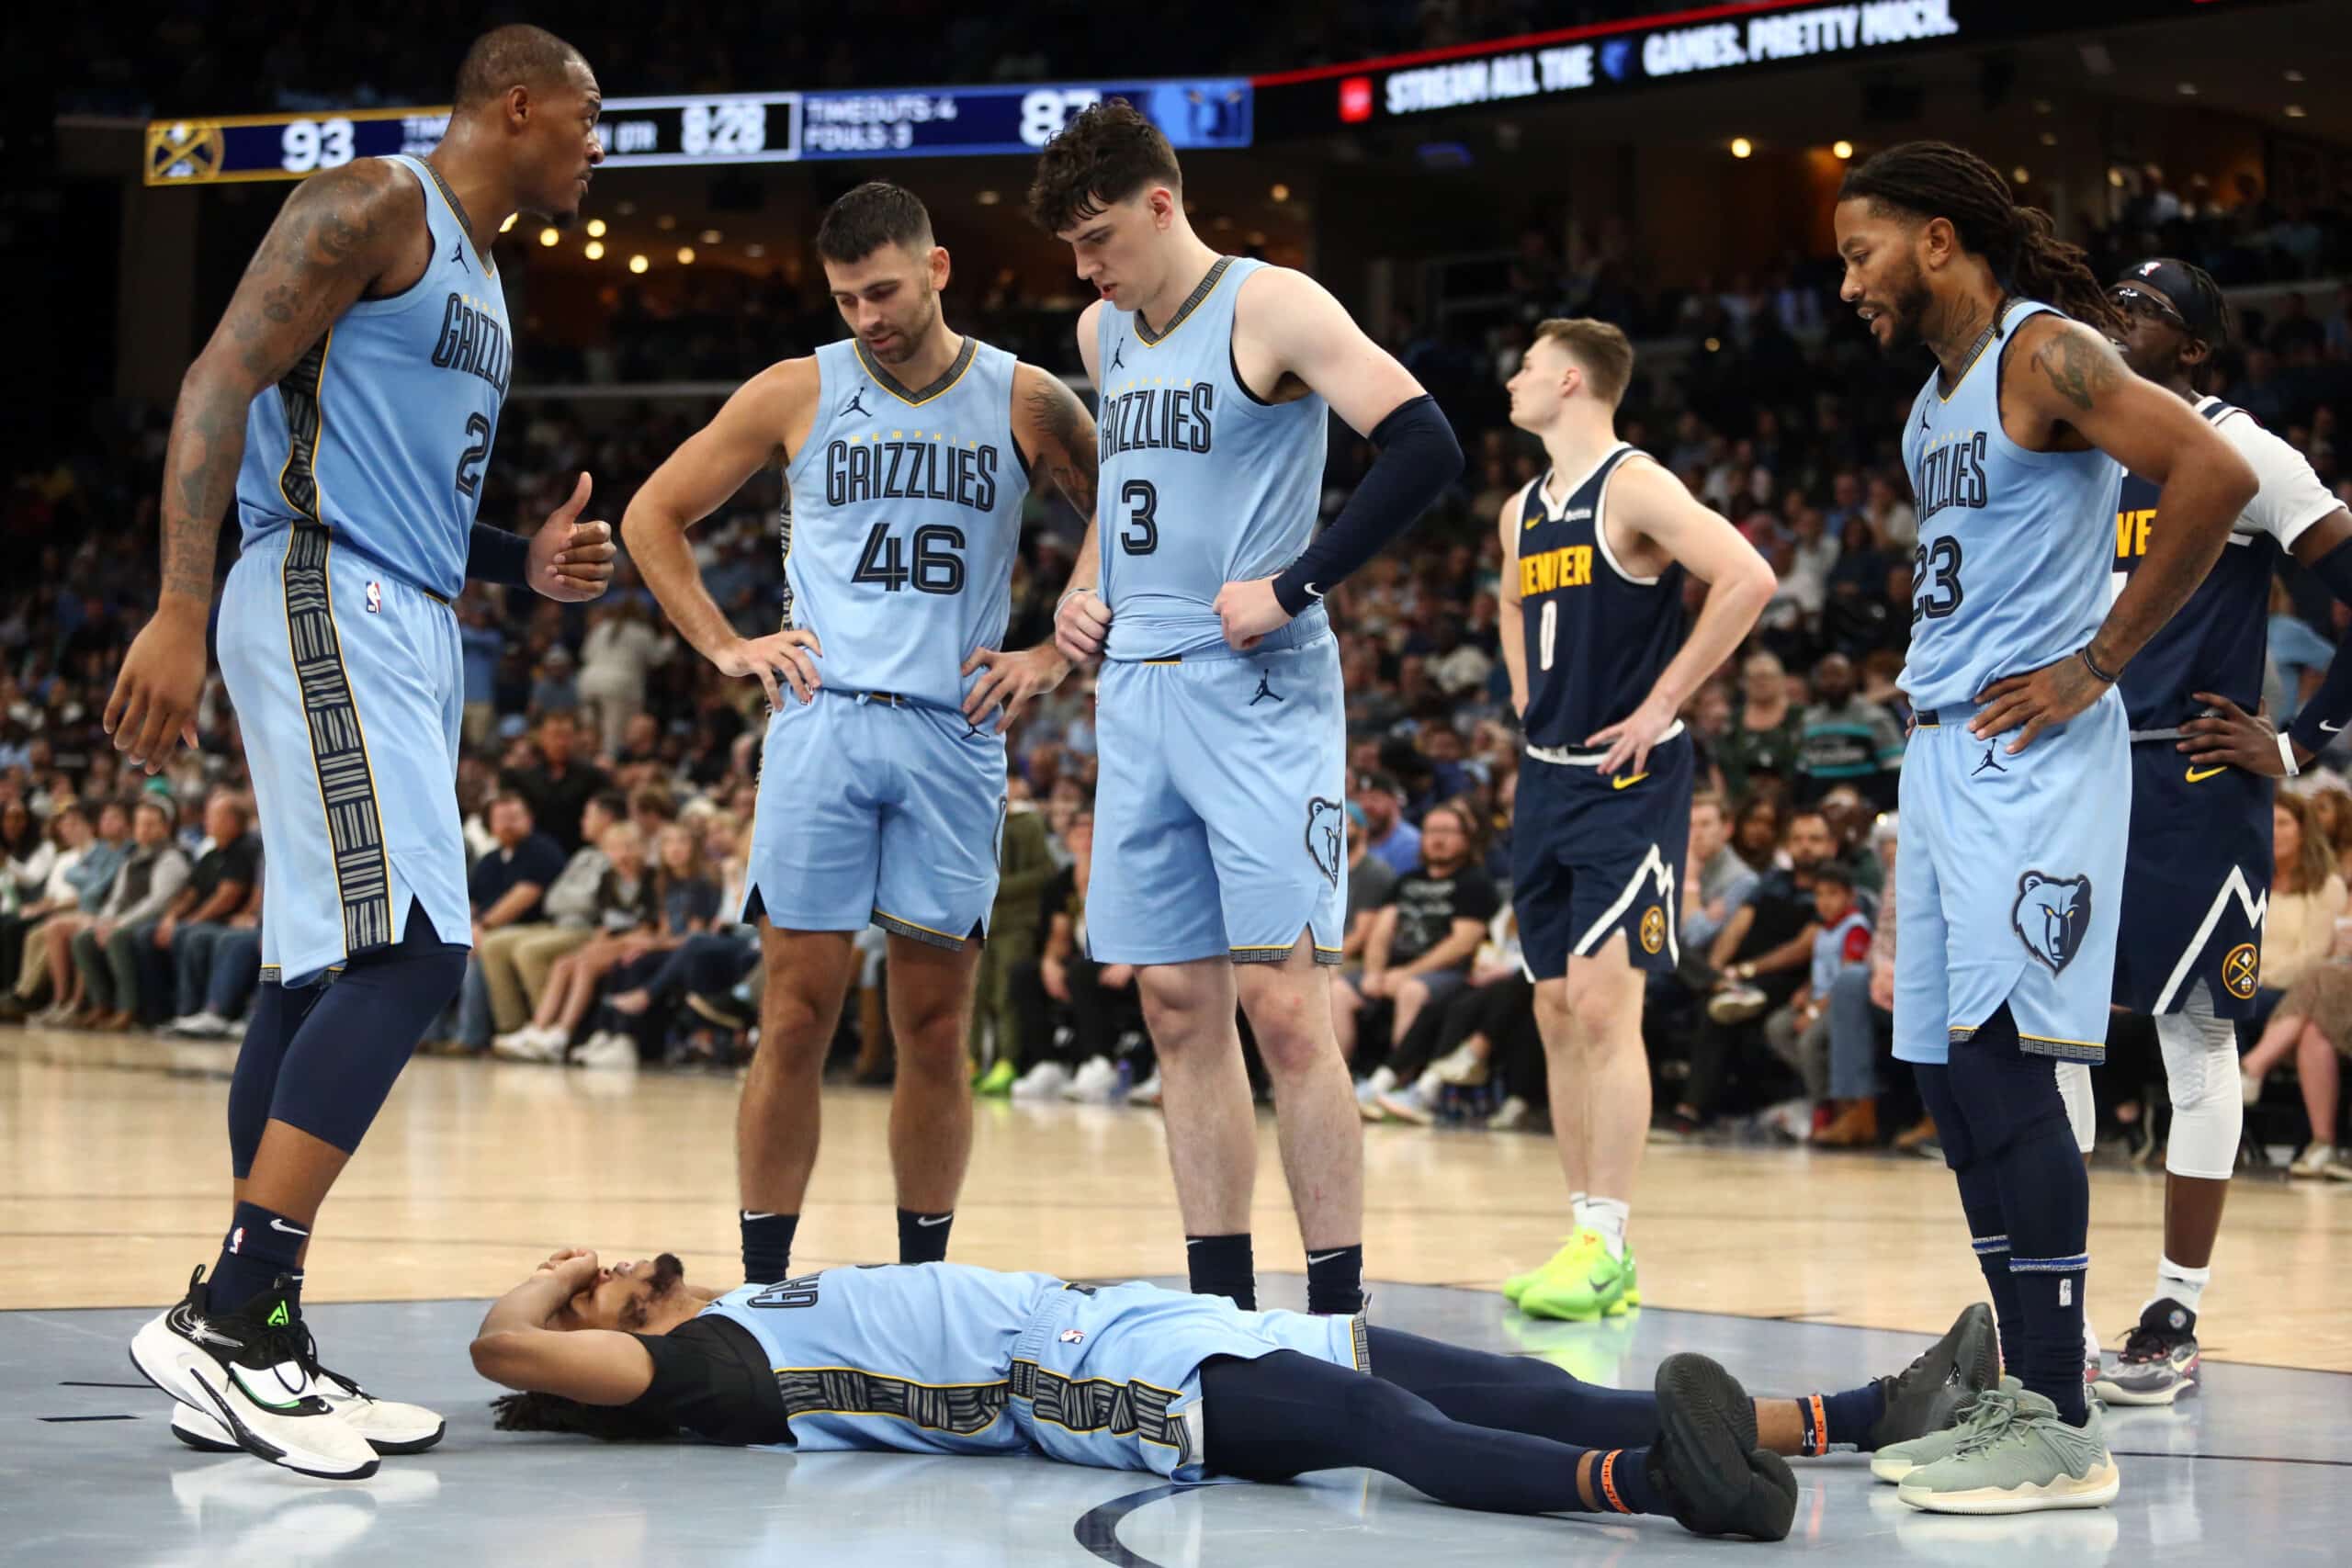 Featured image for “As More Injuries Occur, More Opportunity Emerges for Current Grizzlies”